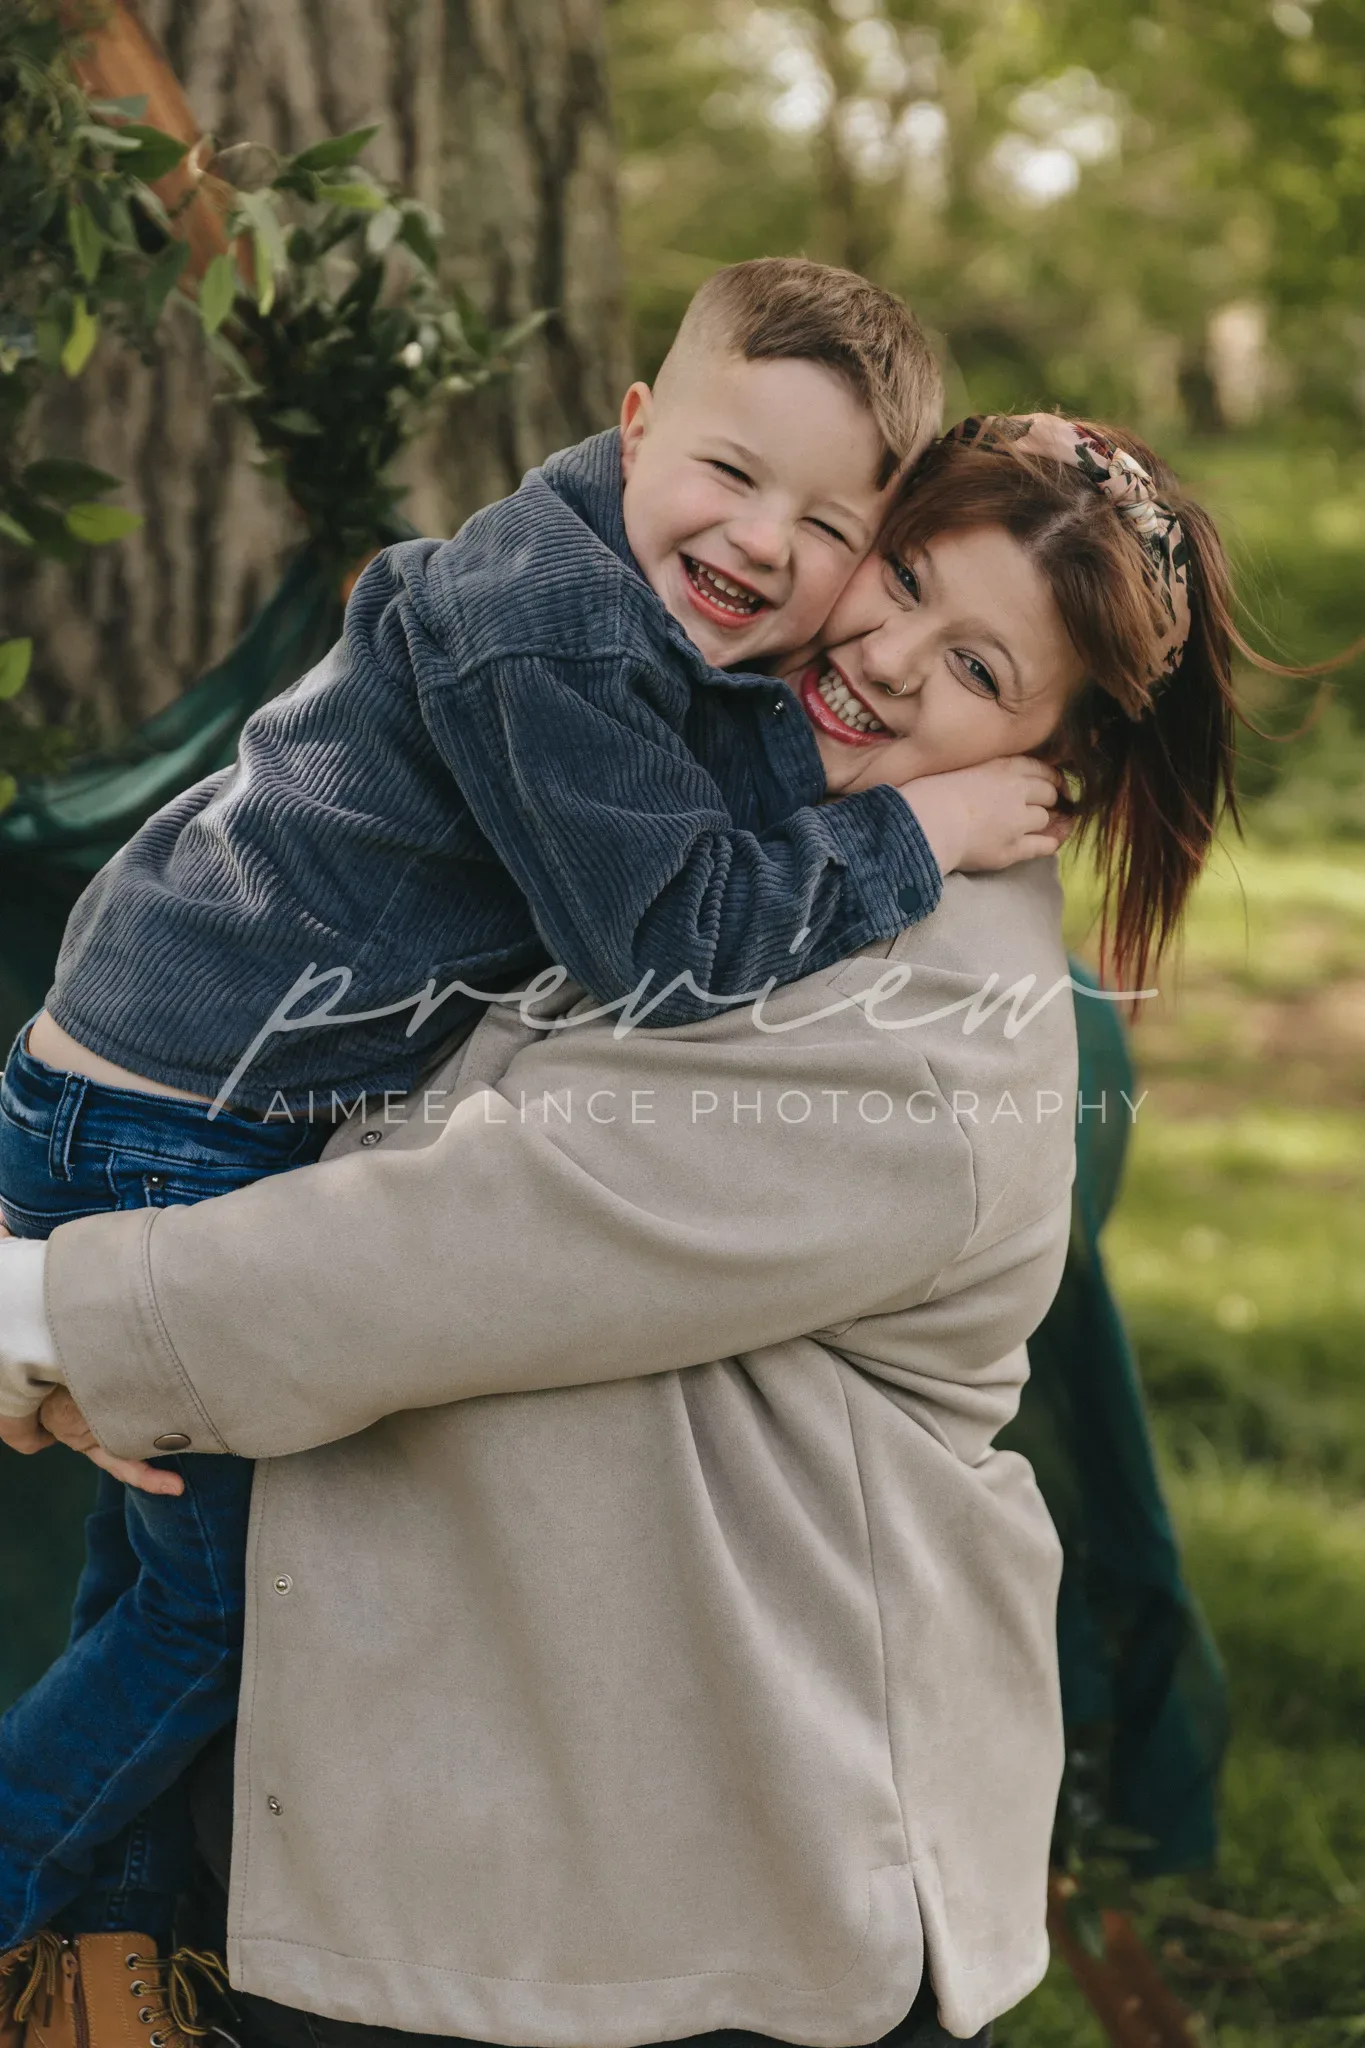 A joyful young boy with short hair hugs a smiling woman named Gabrielle closely in a lush, green park. Both are casually dressed, the boy in a denim jacket and Gabrielle in a beige coat